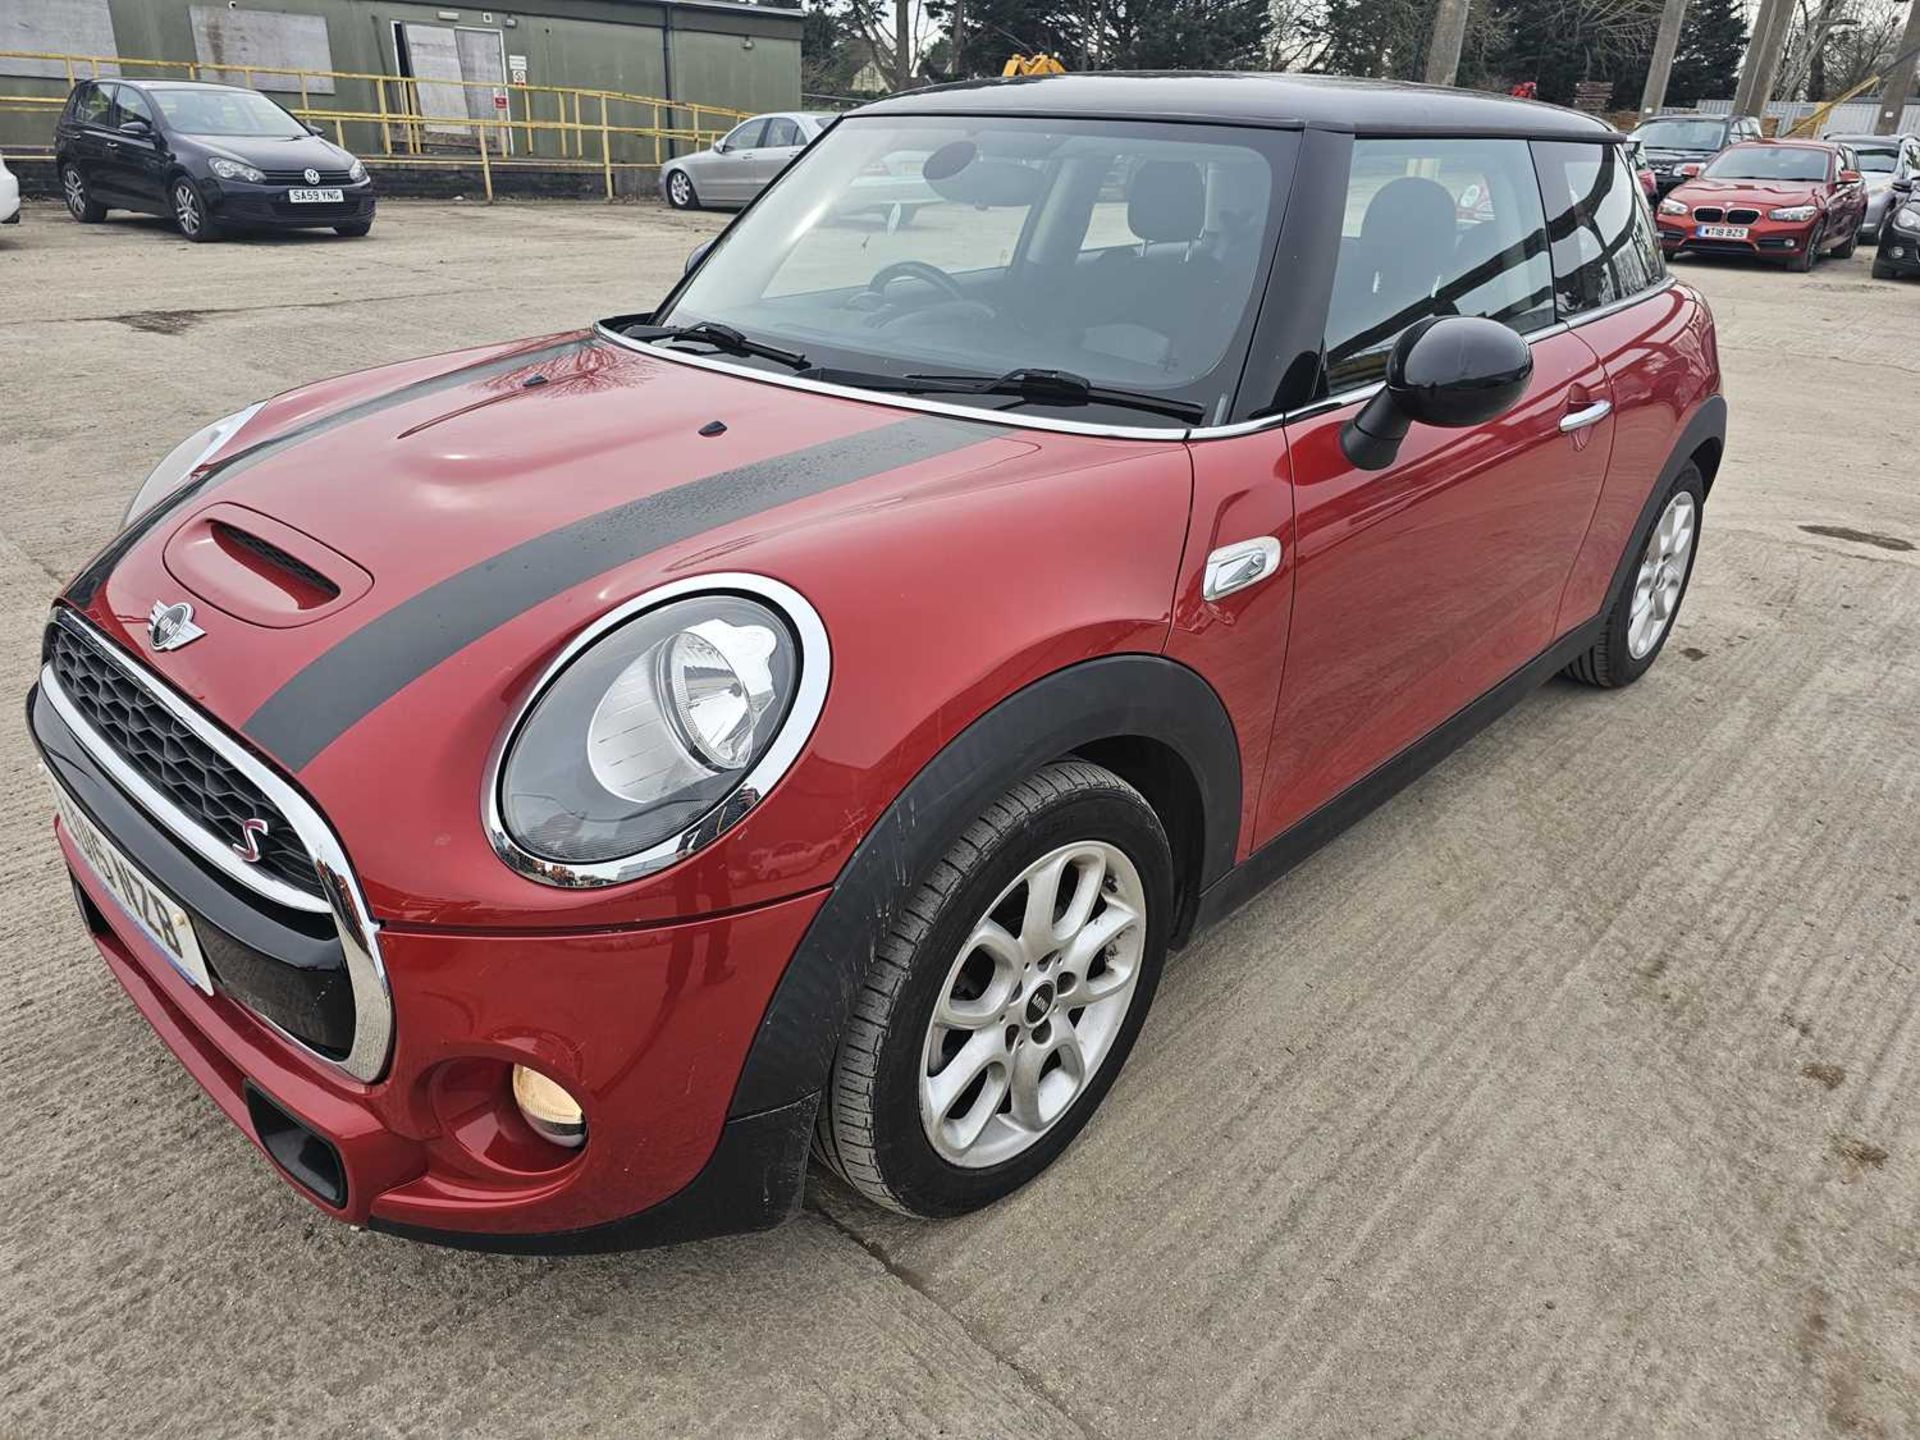 2015 Mini Cooper SD, 6 Speed, Half Leather, A/C (Reg. Docs. Available, Tested 01/25)